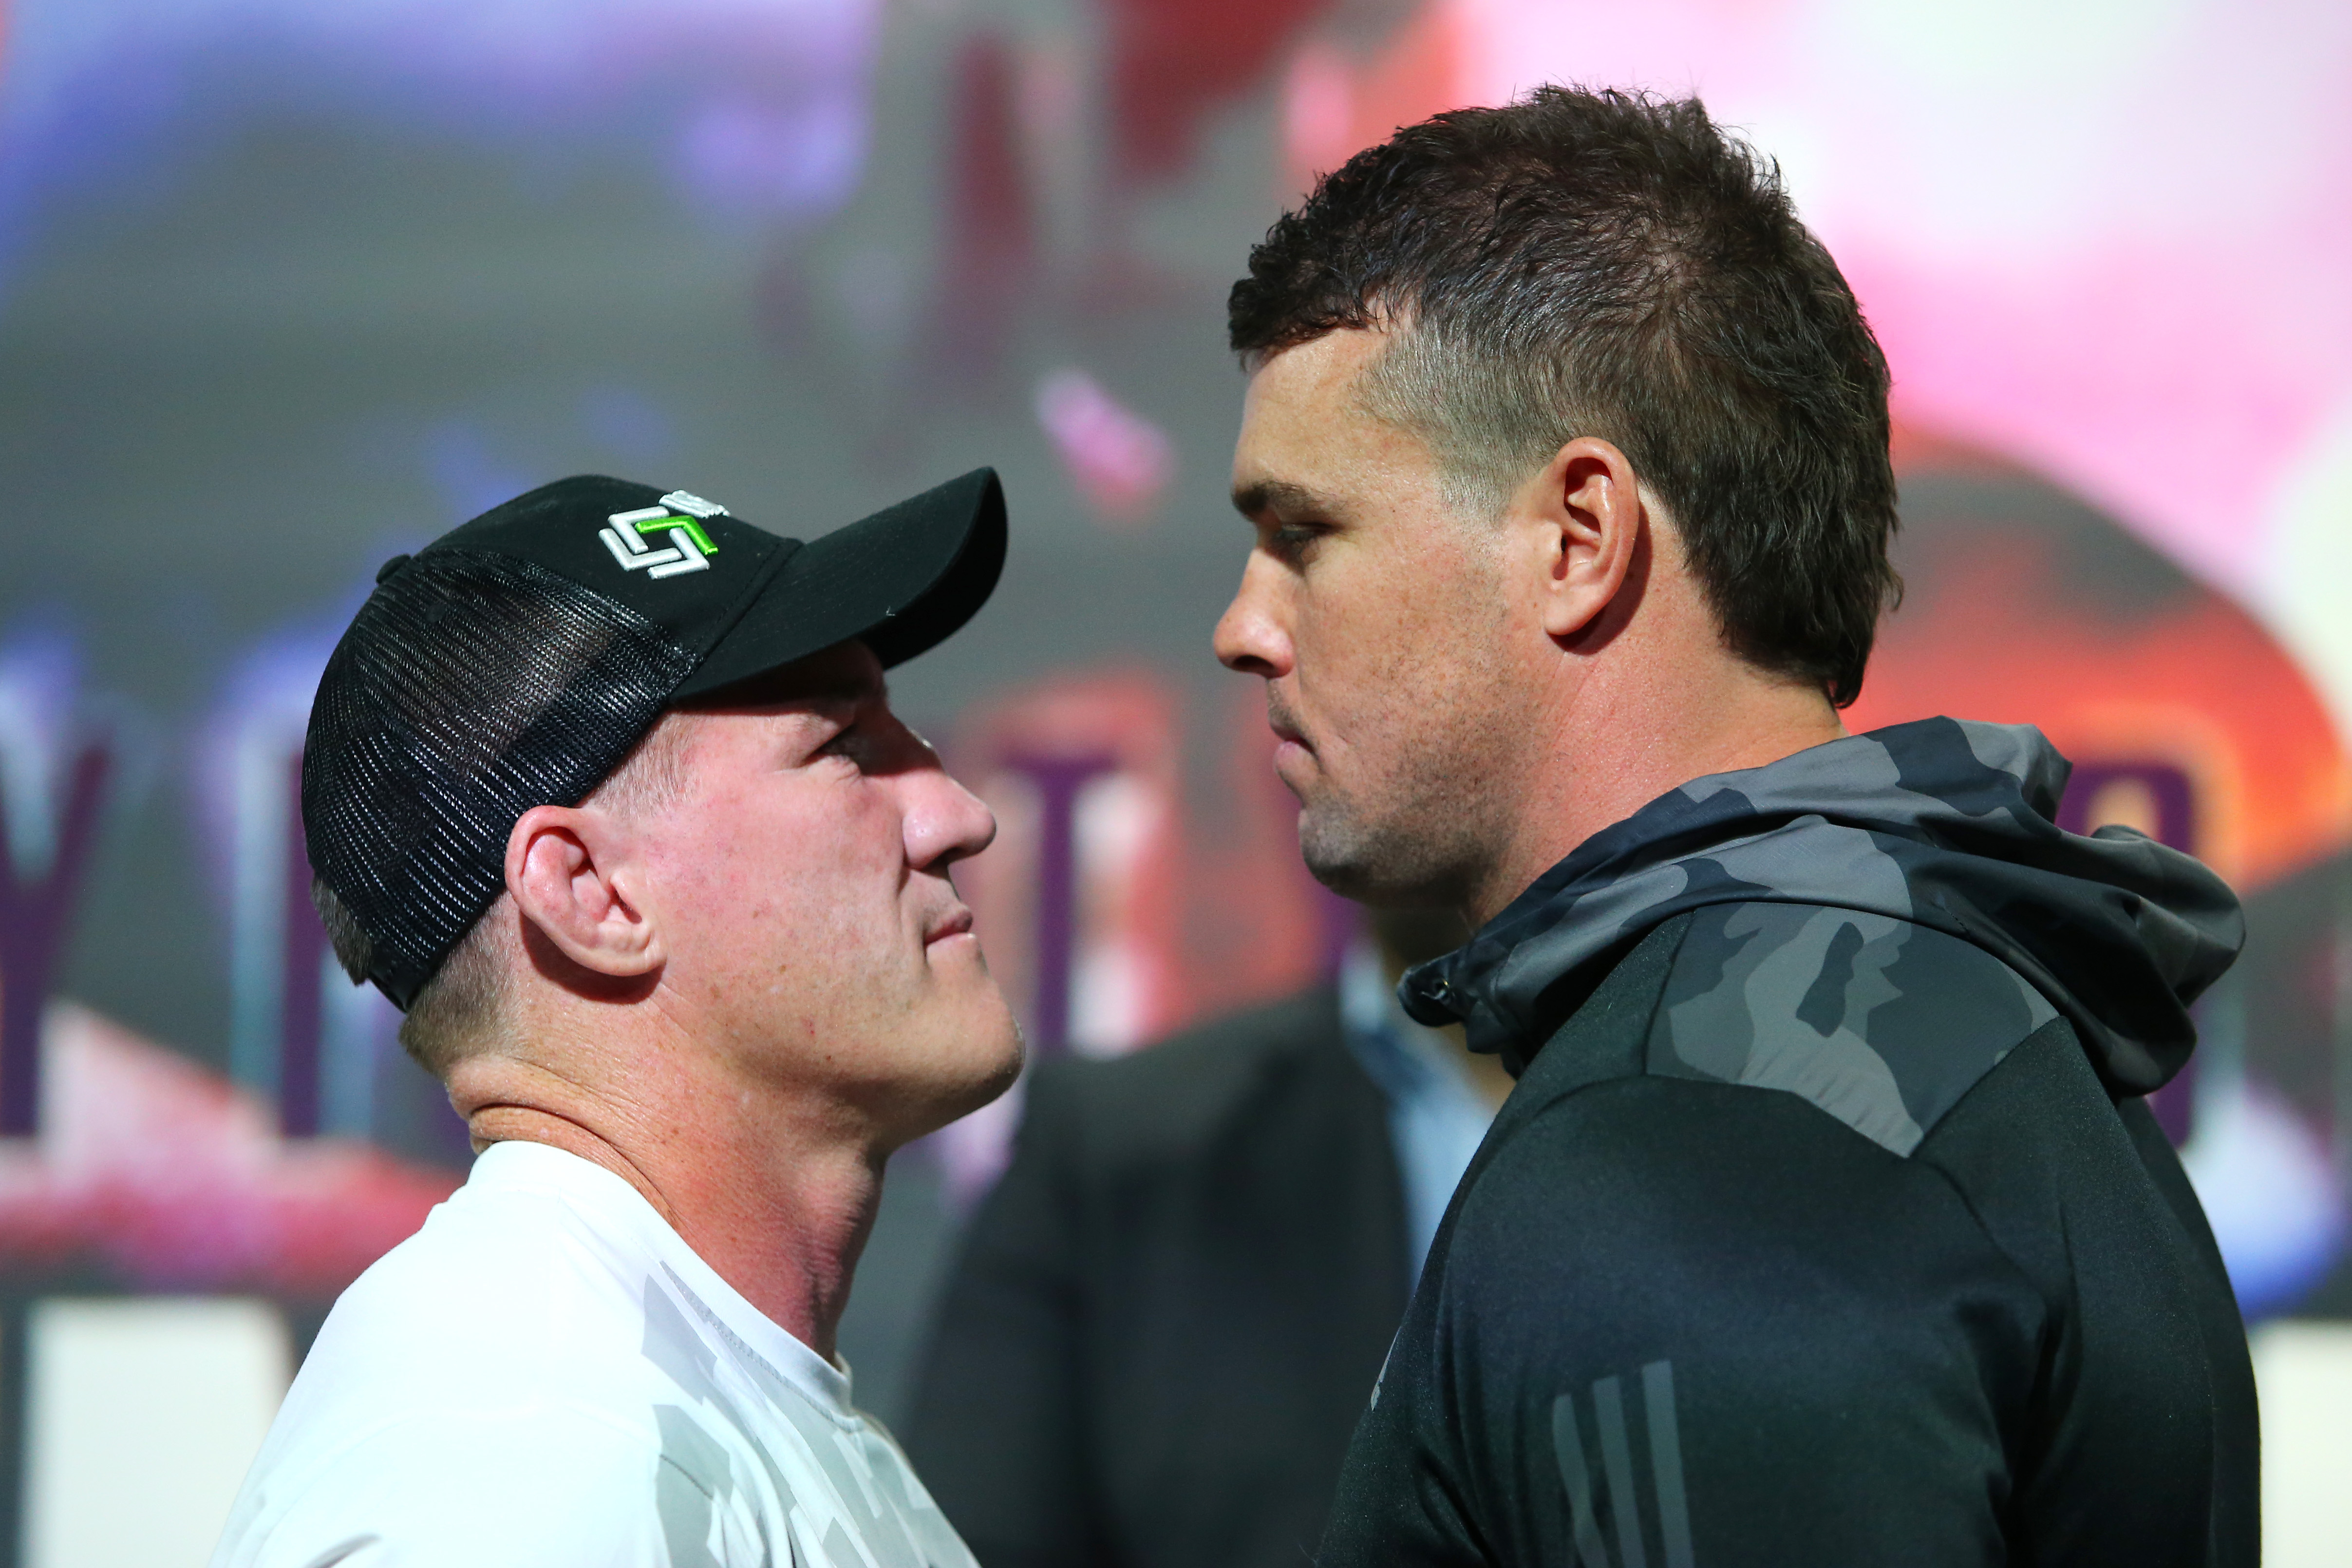 Paul Gallen vs Darcy Lussick boxing fight Date, Time, Tickets, Card, Odds, How to watch and everything you need to know Ultimate Guide